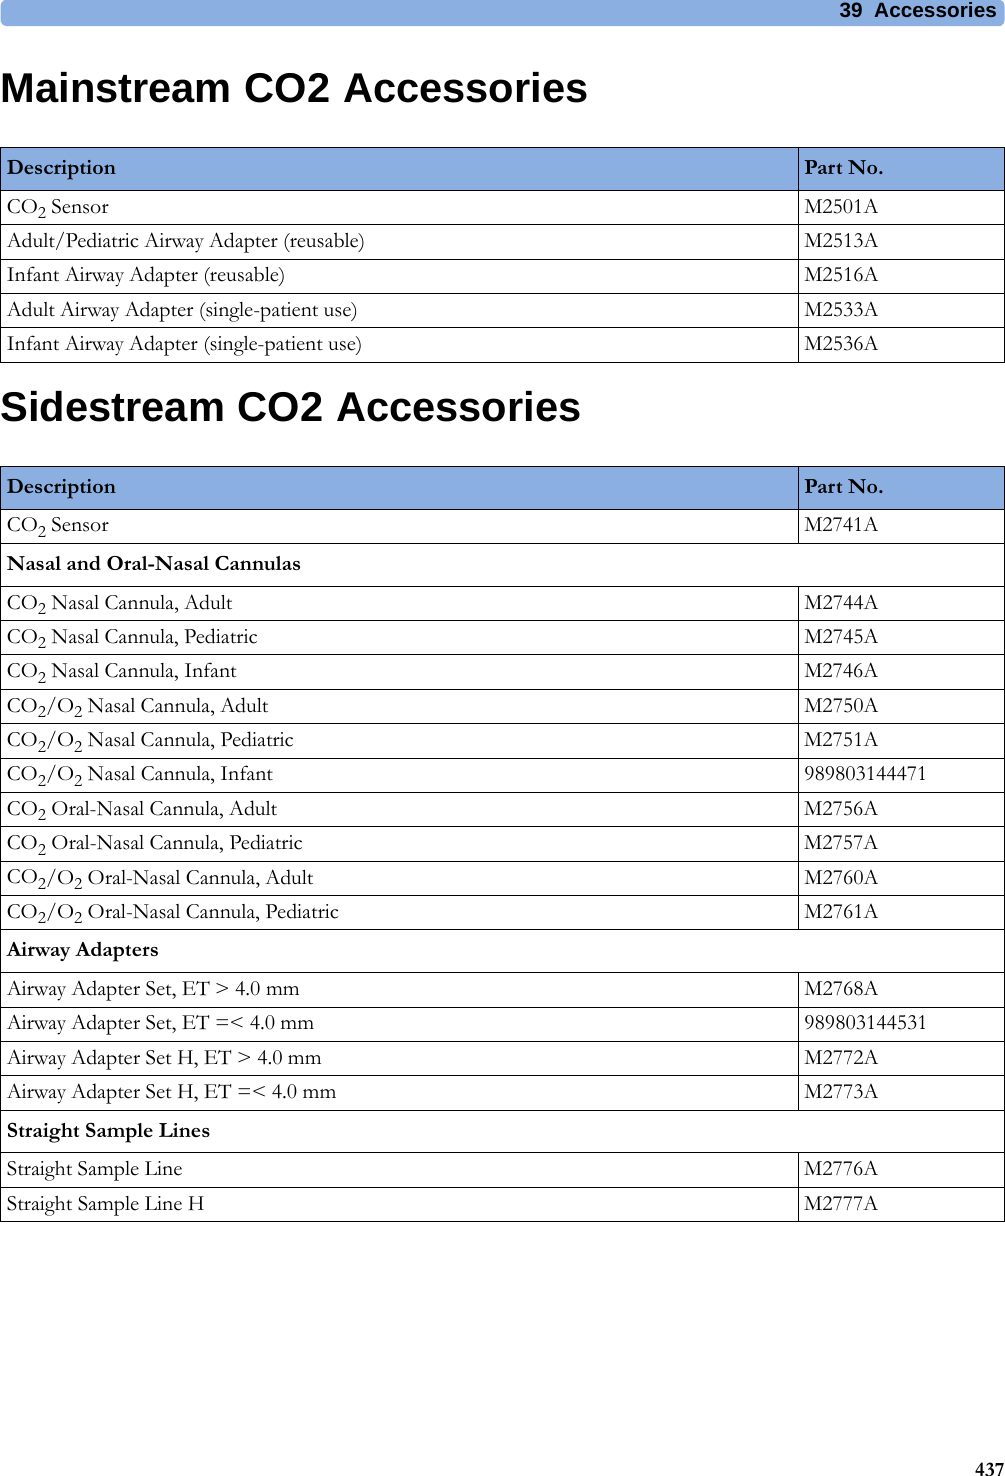 39 Accessories437Mainstream CO2 AccessoriesSidestream CO2 AccessoriesDescription Part No.CO2 Sensor M2501AAdult/Pediatric Airway Adapter (reusable) M2513AInfant Airway Adapter (reusable) M2516AAdult Airway Adapter (single-patient use) M2533AInfant Airway Adapter (single-patient use) M2536ADescription Part No.CO2 Sensor M2741ANasal and Oral-Nasal CannulasCO2 Nasal Cannula, Adult M2744ACO2 Nasal Cannula, Pediatric M2745ACO2 Nasal Cannula, Infant M2746ACO2/O2 Nasal Cannula, Adult M2750ACO2/O2 Nasal Cannula, Pediatric M2751ACO2/O2 Nasal Cannula, Infant 989803144471CO2 Oral-Nasal Cannula, Adult M2756ACO2 Oral-Nasal Cannula, Pediatric M2757ACO2/O2 Oral-Nasal Cannula, Adult M2760ACO2/O2 Oral-Nasal Cannula, Pediatric M2761AAirway AdaptersAirway Adapter Set, ET &gt; 4.0 mm M2768AAirway Adapter Set, ET =&lt; 4.0 mm 989803144531Airway Adapter Set H, ET &gt; 4.0 mm M2772AAirway Adapter Set H, ET =&lt; 4.0 mm M2773AStraight Sample LinesStraight Sample Line M2776AStraight Sample Line H M2777A